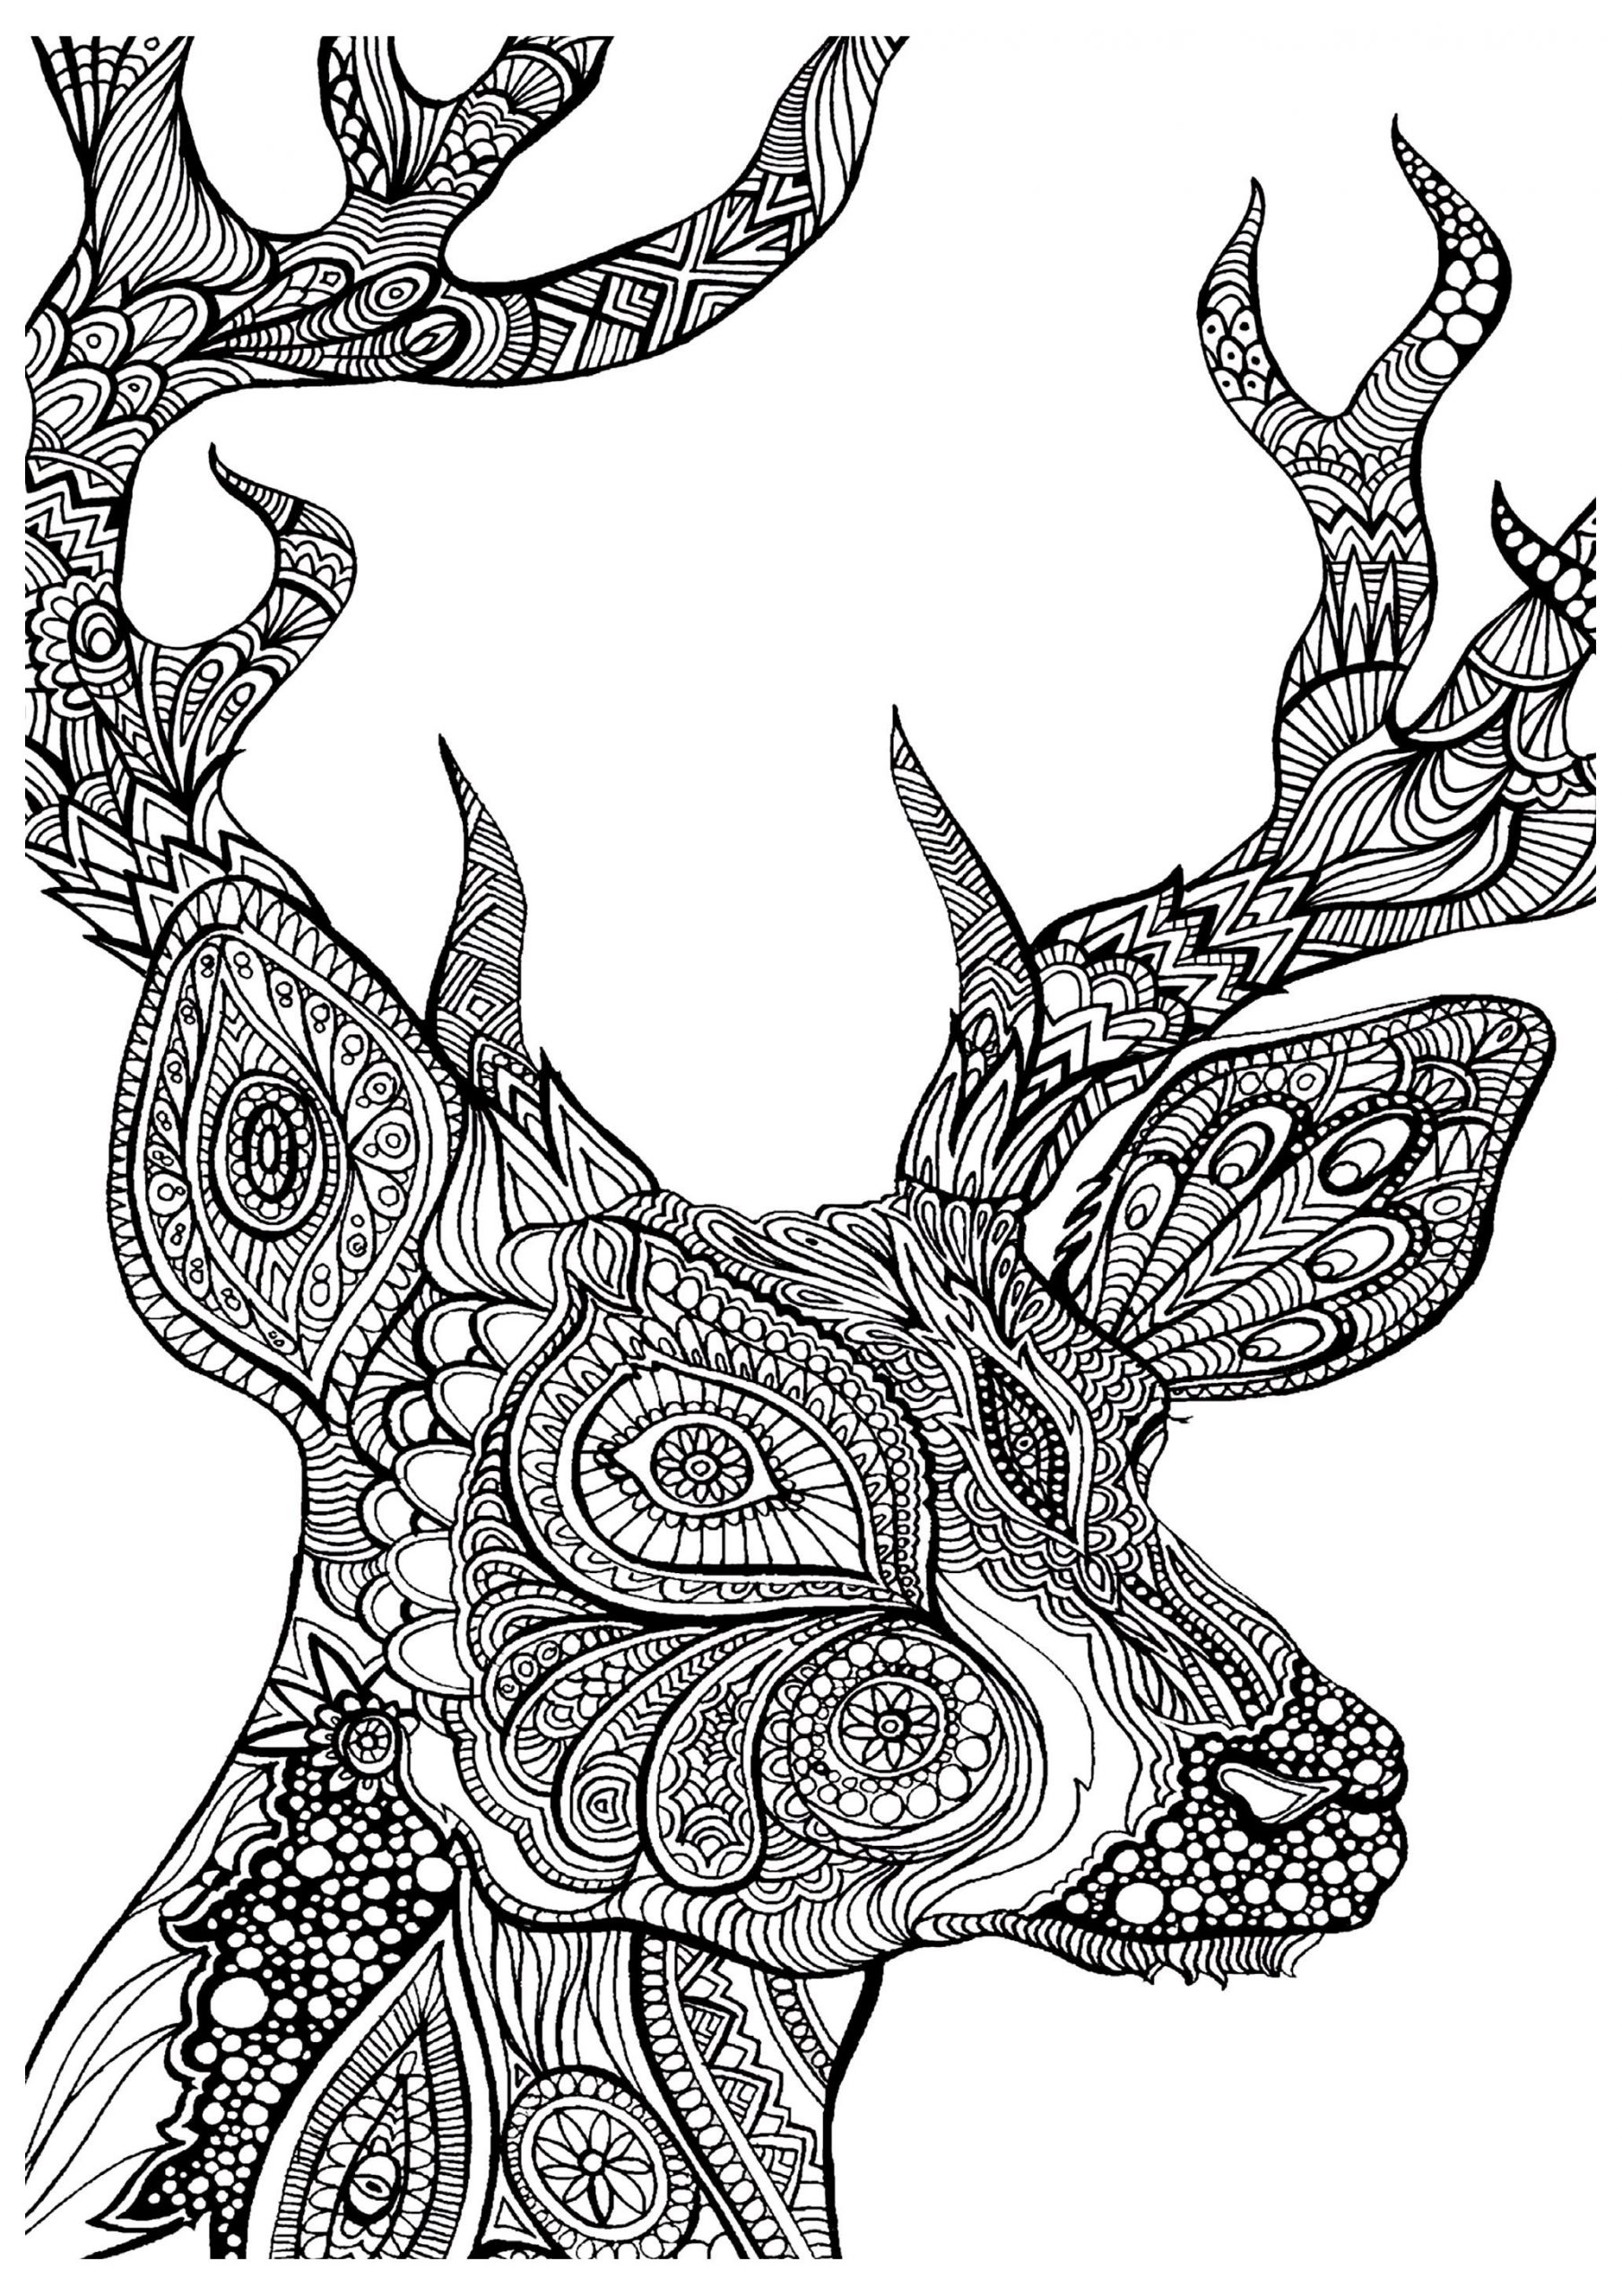 Adult Coloring Book
 19 of the Best Adult Colouring Pages Free Printables for